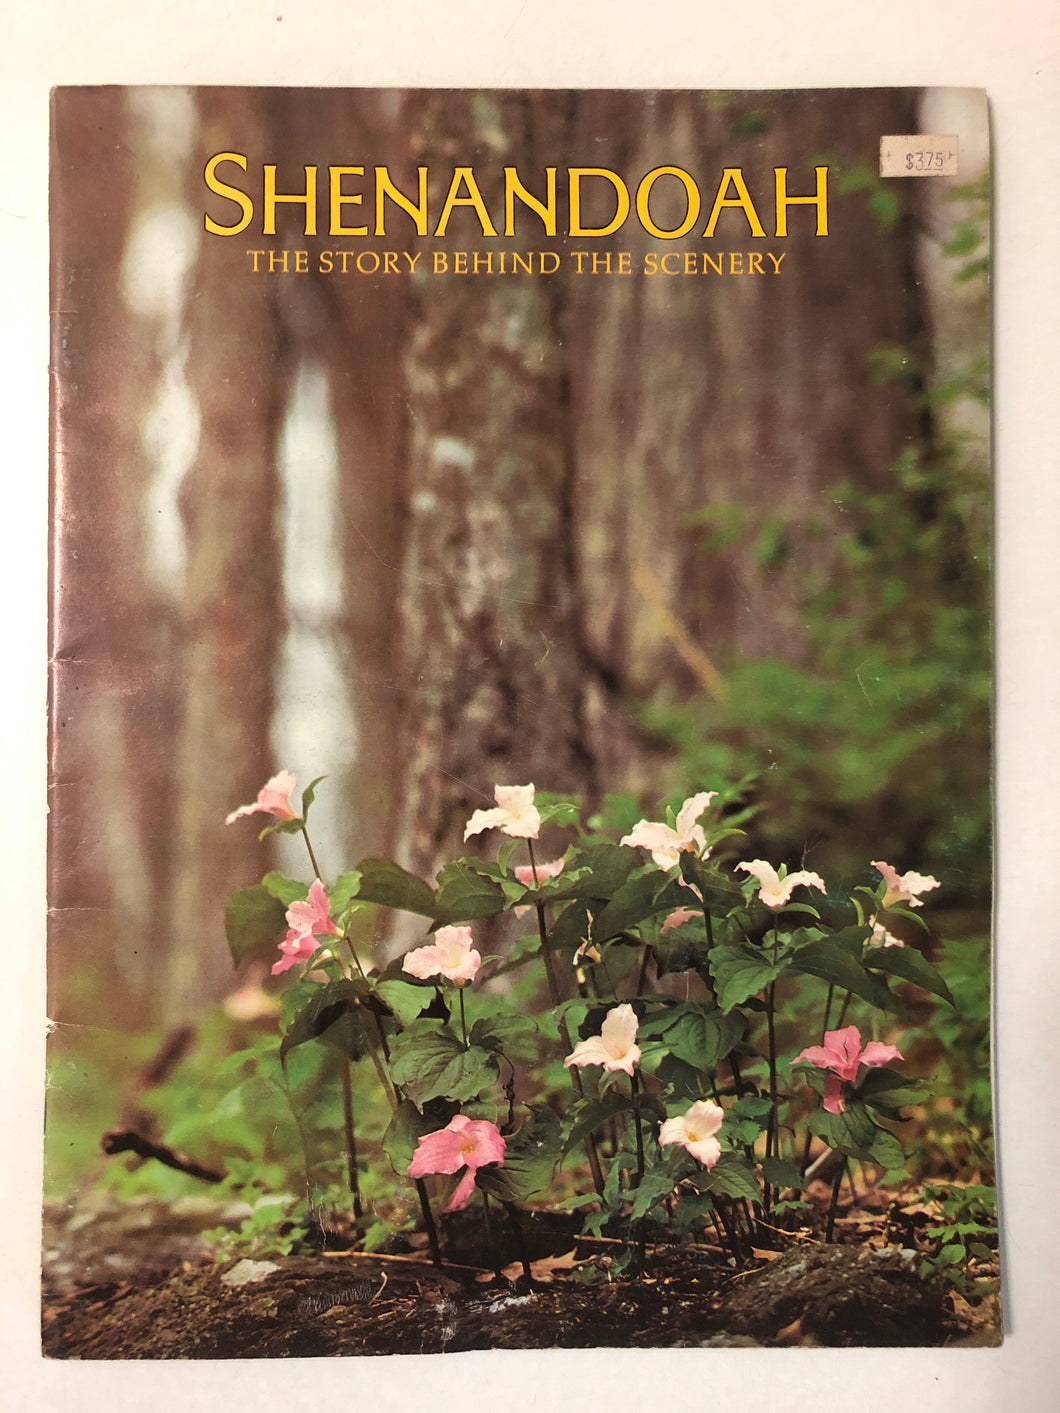 Shenandoah The Story Behind the Scenery - Slick Cat Books 